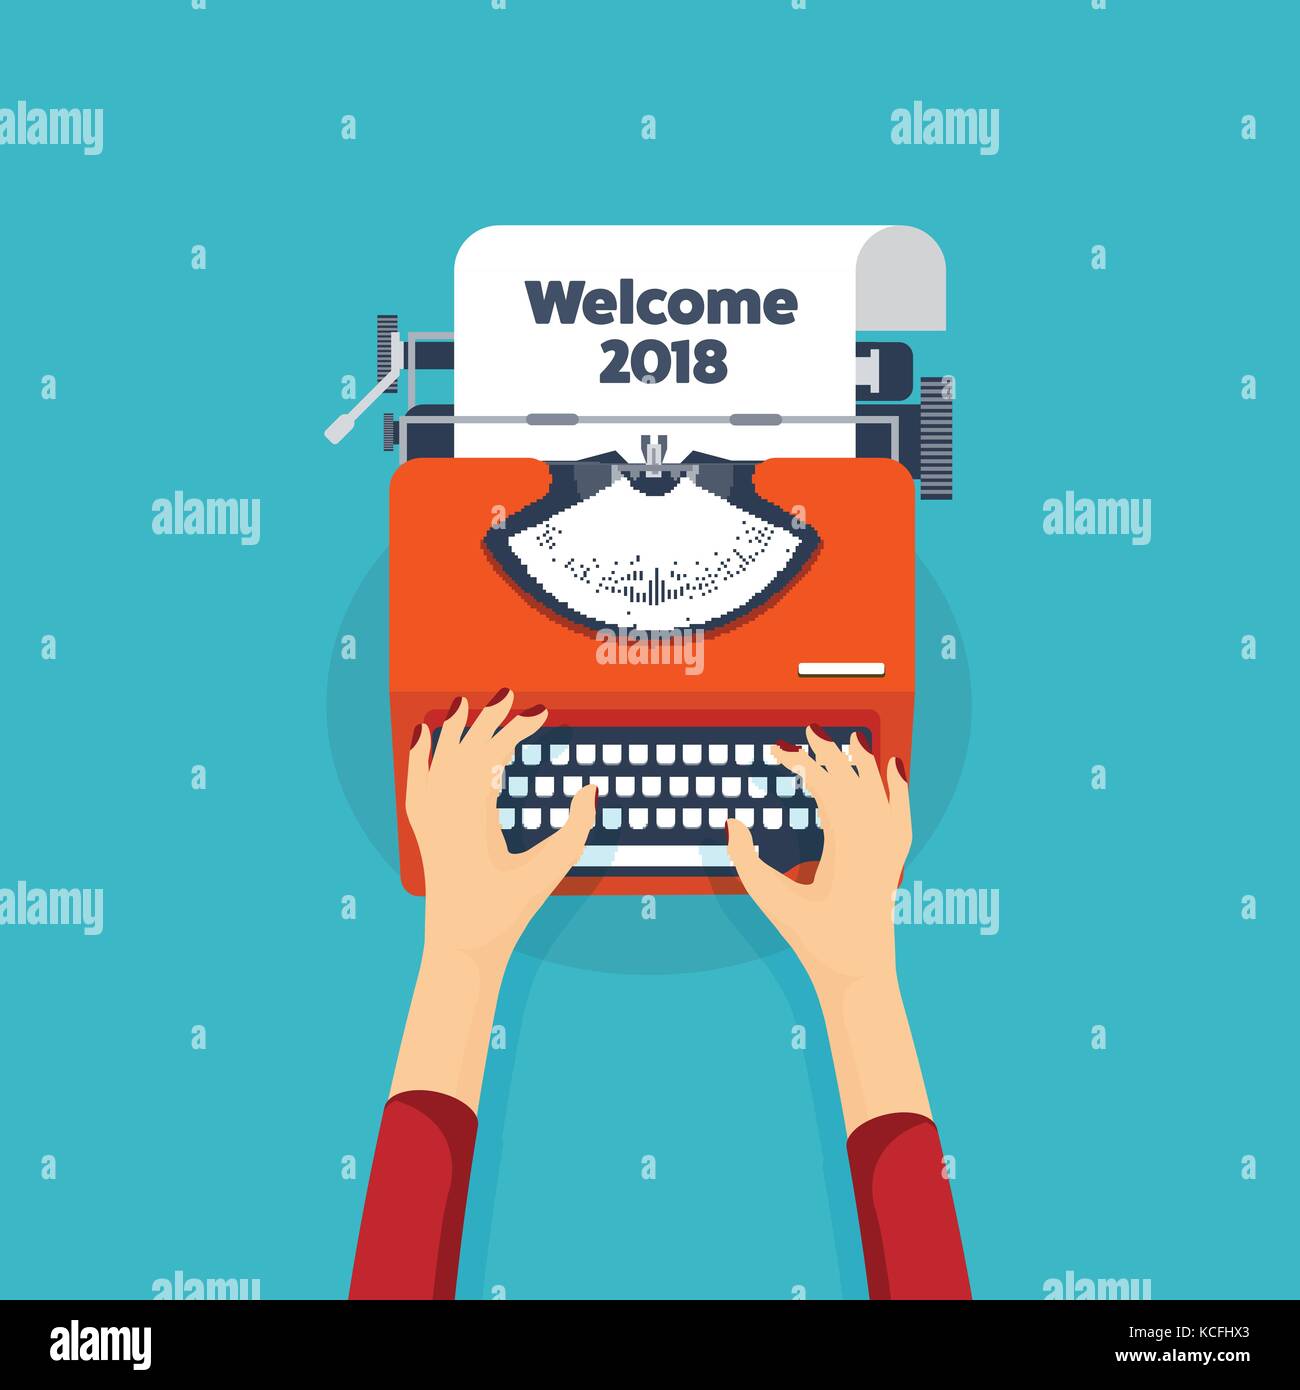 Typewriter in a flat style. Christmas wish list. Letter to Santa. New year. 2018. December holidays. Stock Vector